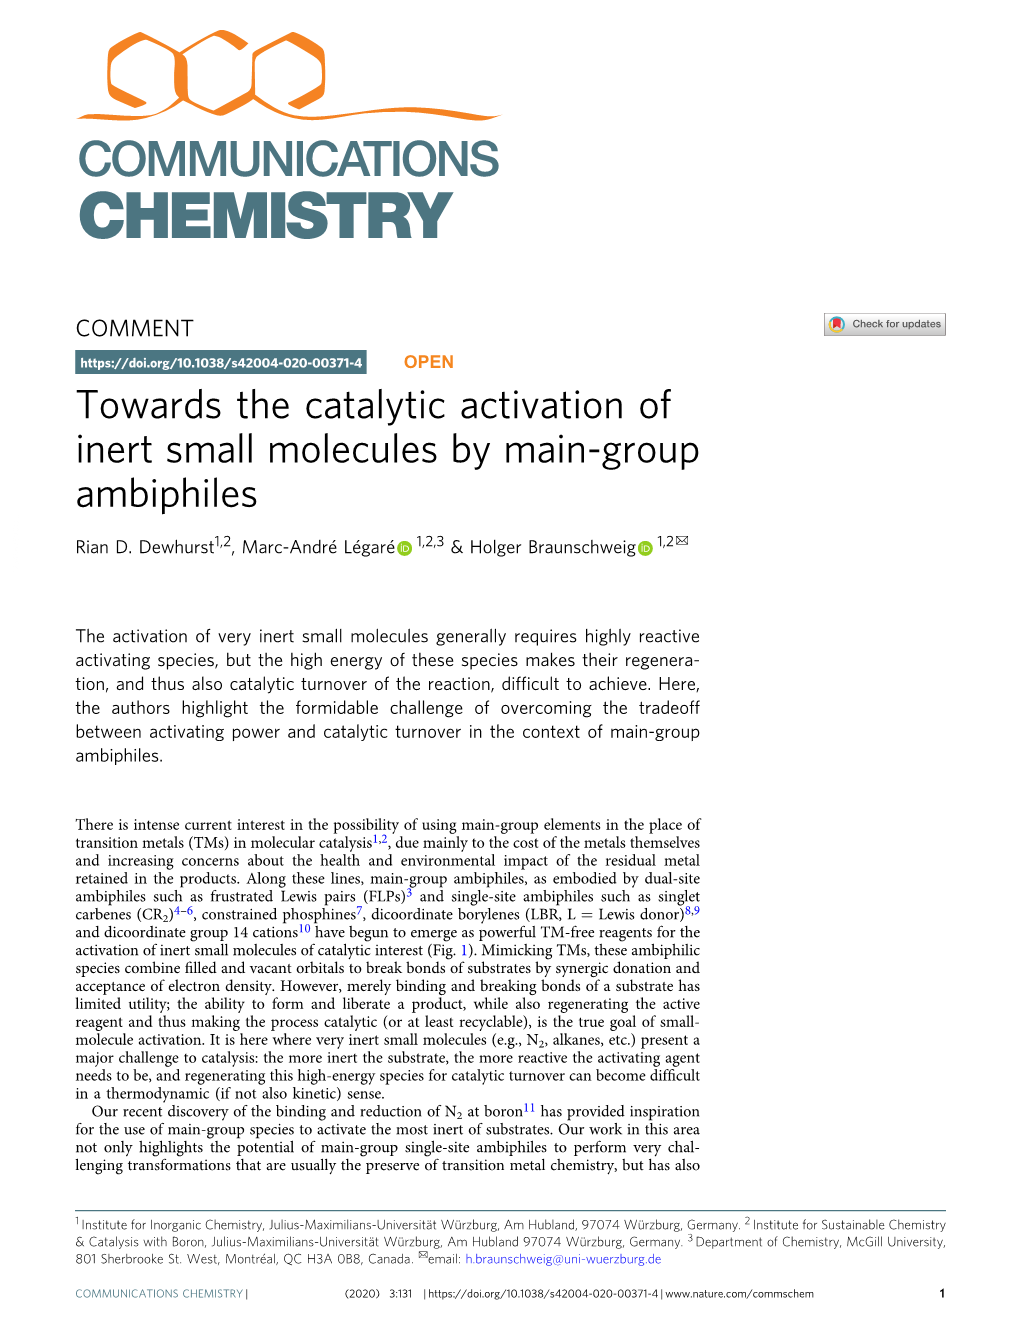 Towards the Catalytic Activation of Inert Small Molecules by Main-Group Ambiphiles ✉ Rian D